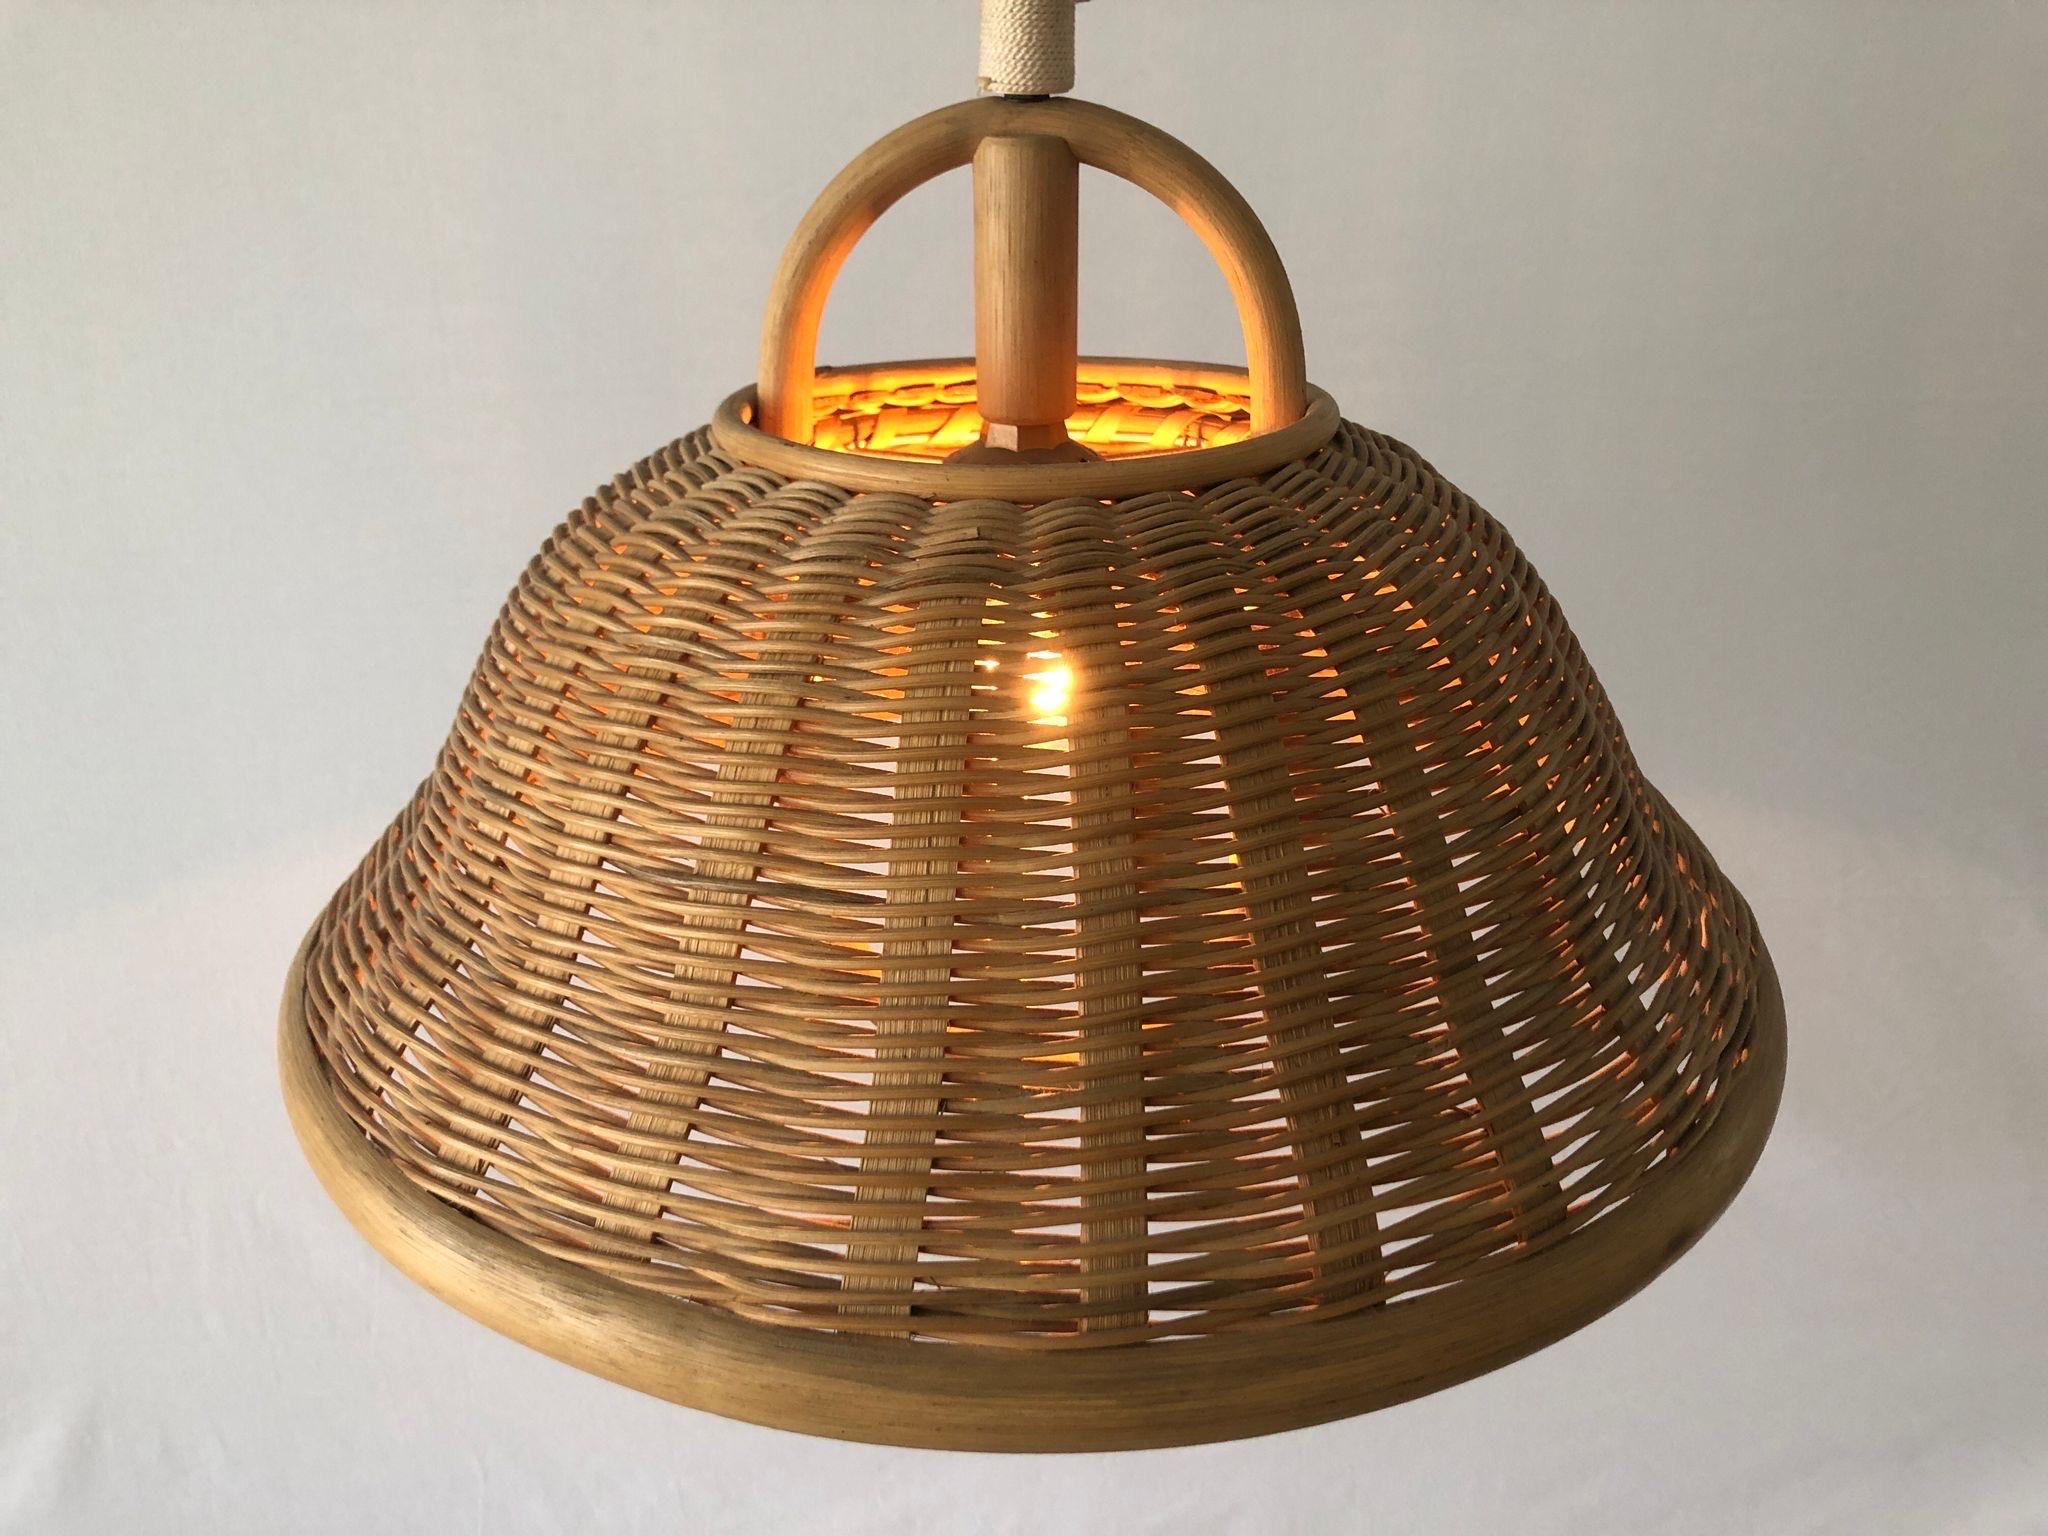 Large Wicker Adjustable Shade Pendant Lamp, 1960s, Germany For Sale 5